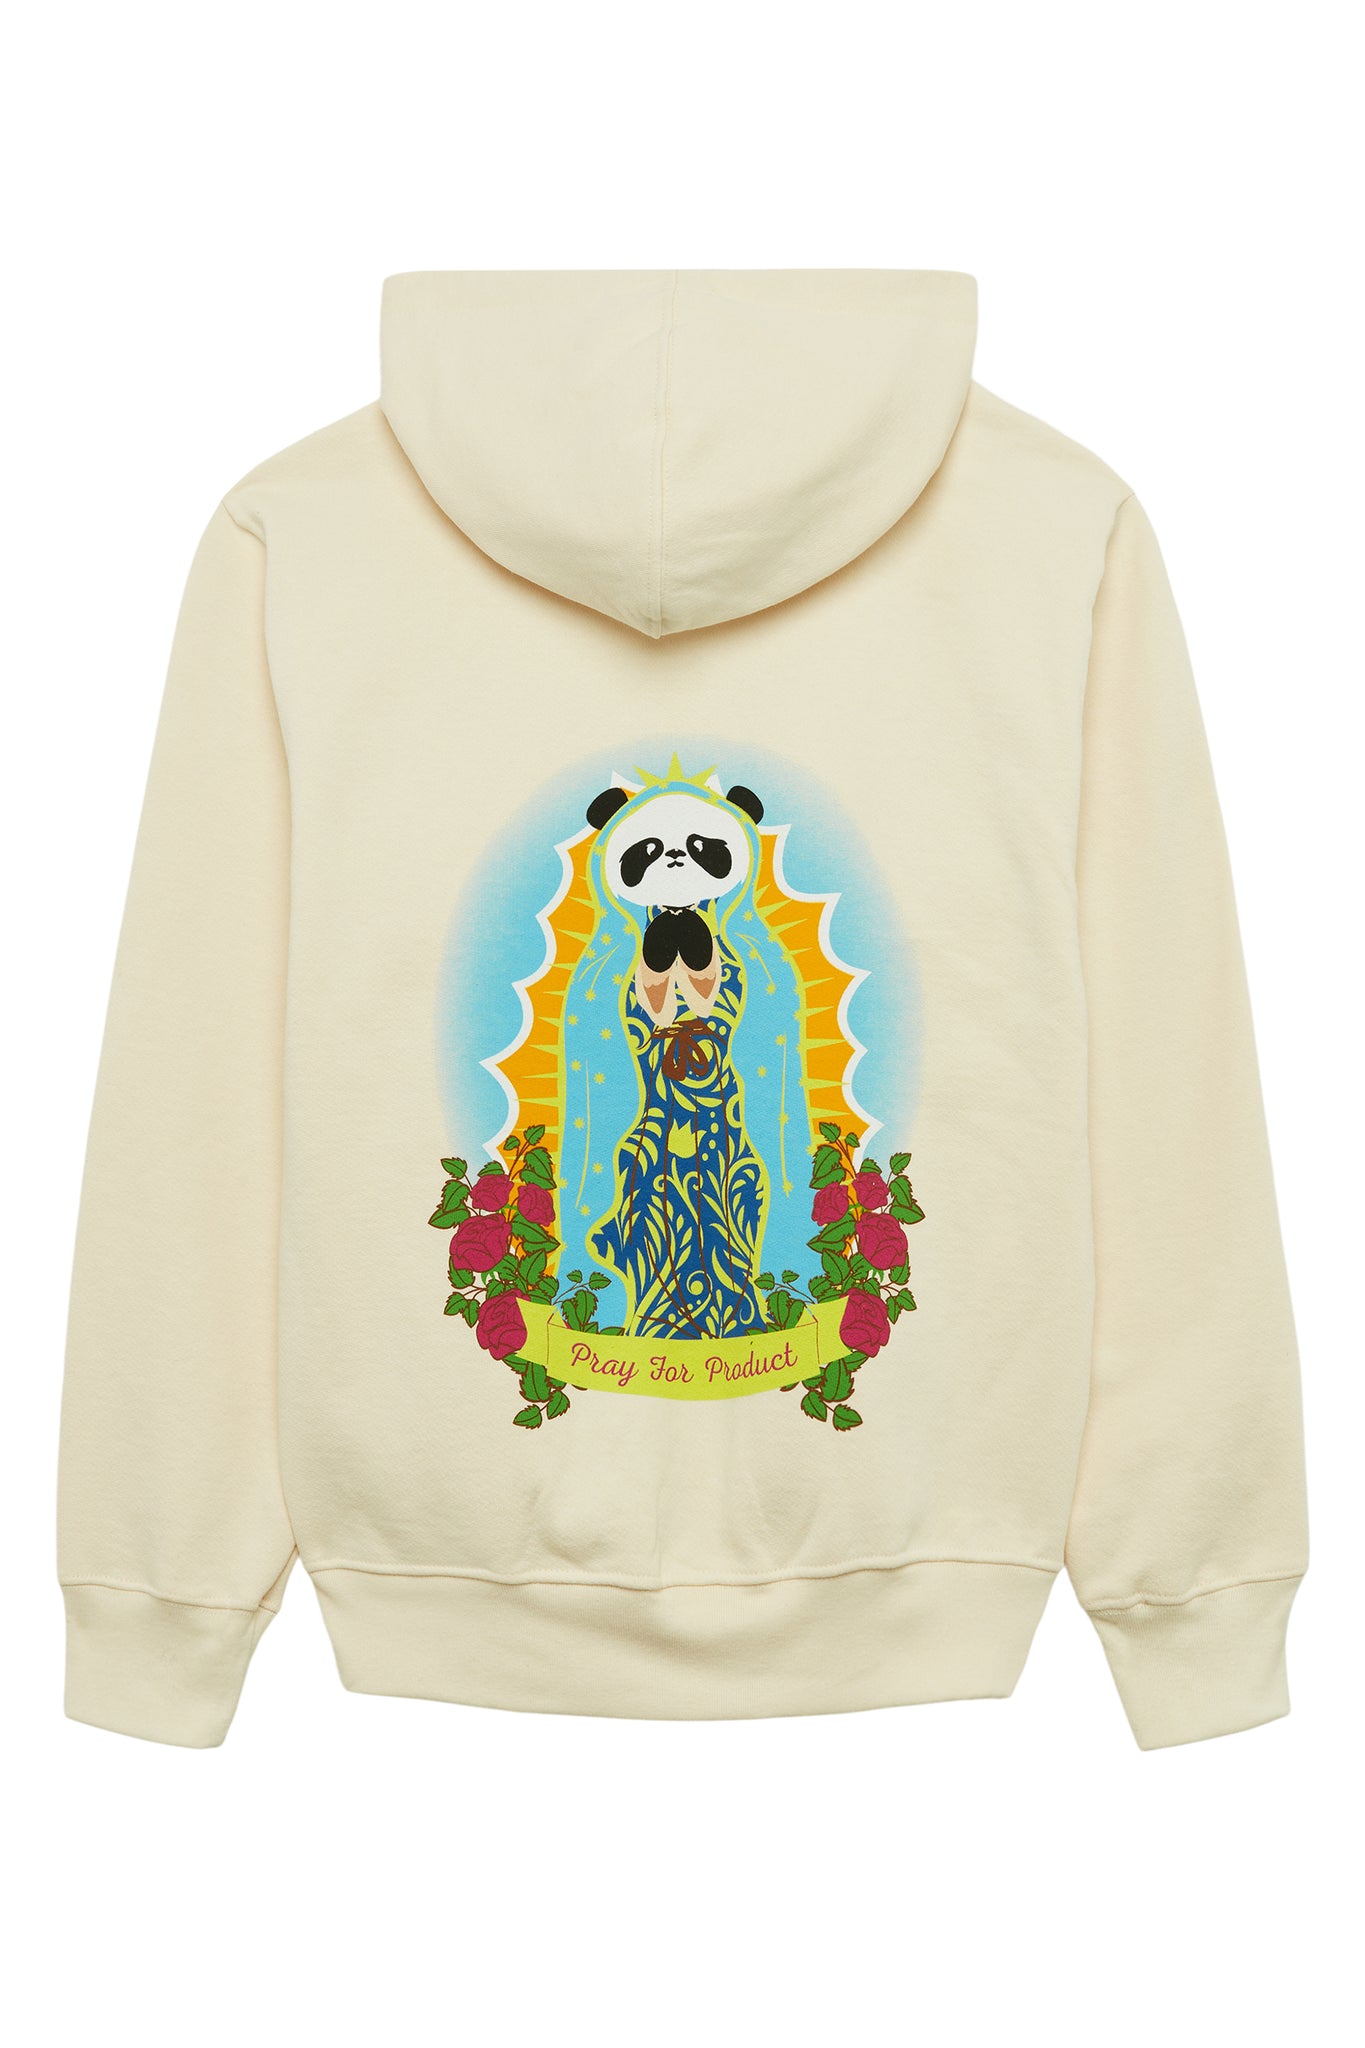 PRAY FOR PRODUCT HOODIE | CREAM